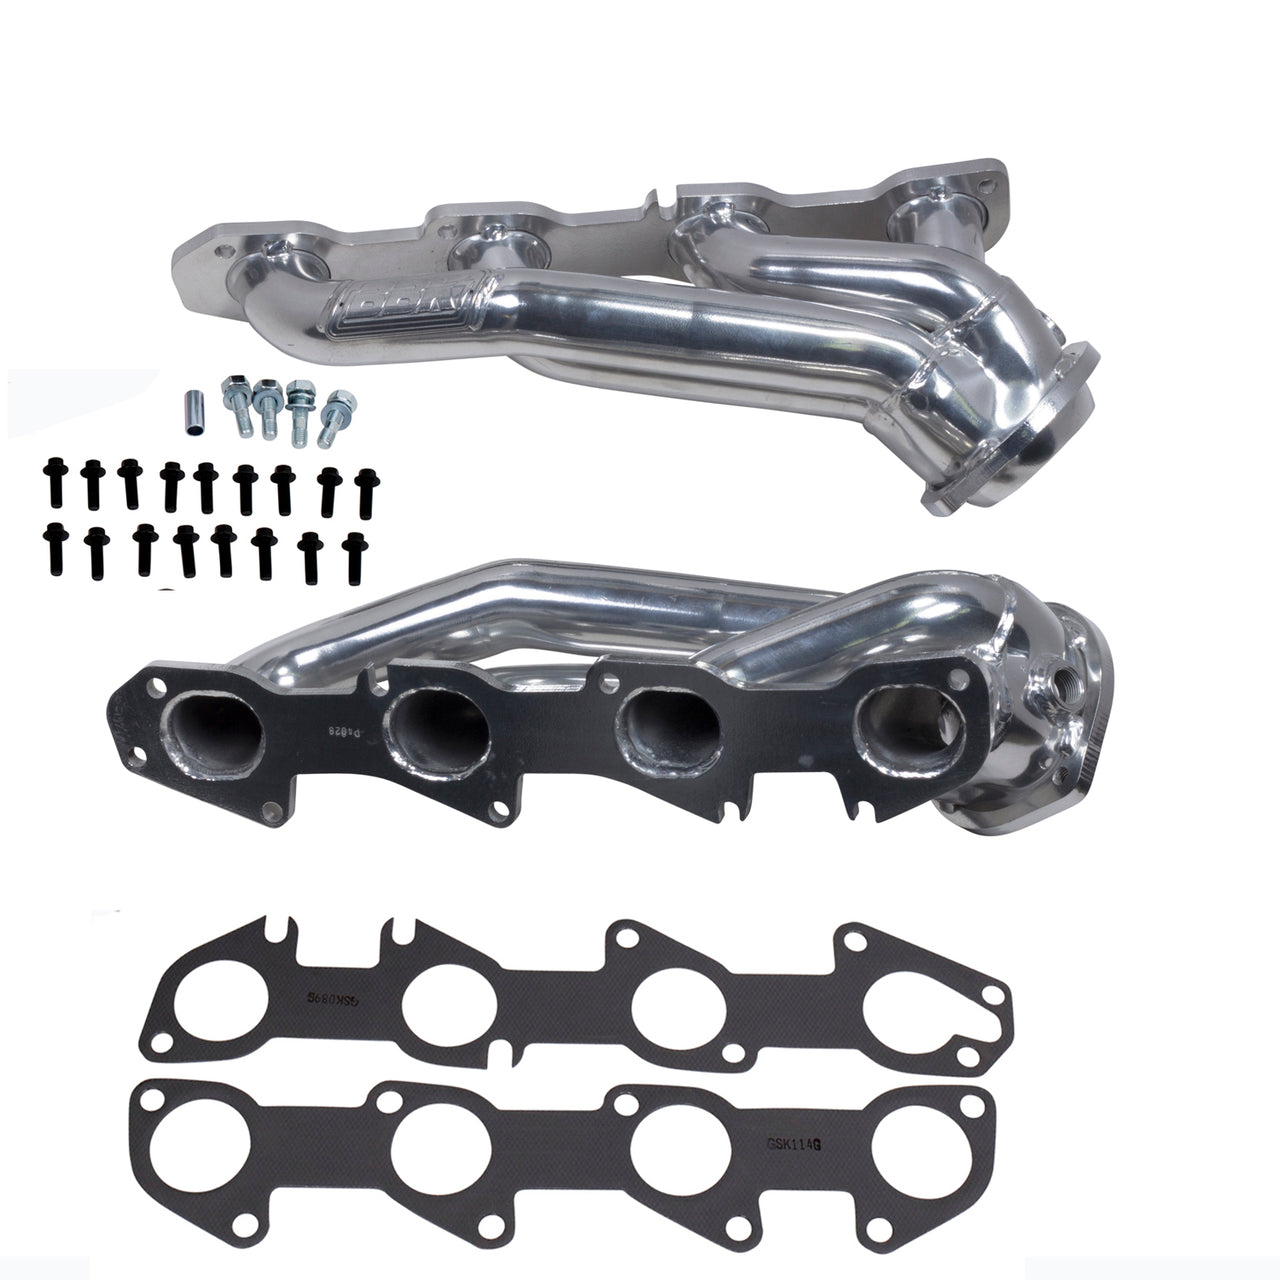 2009-2021 DODGE 5.7L CHALLENGER CHARGER HEMI CARS 1-3/4 SHORTY HEADERS (POLISHED SILVER CERAMIC)